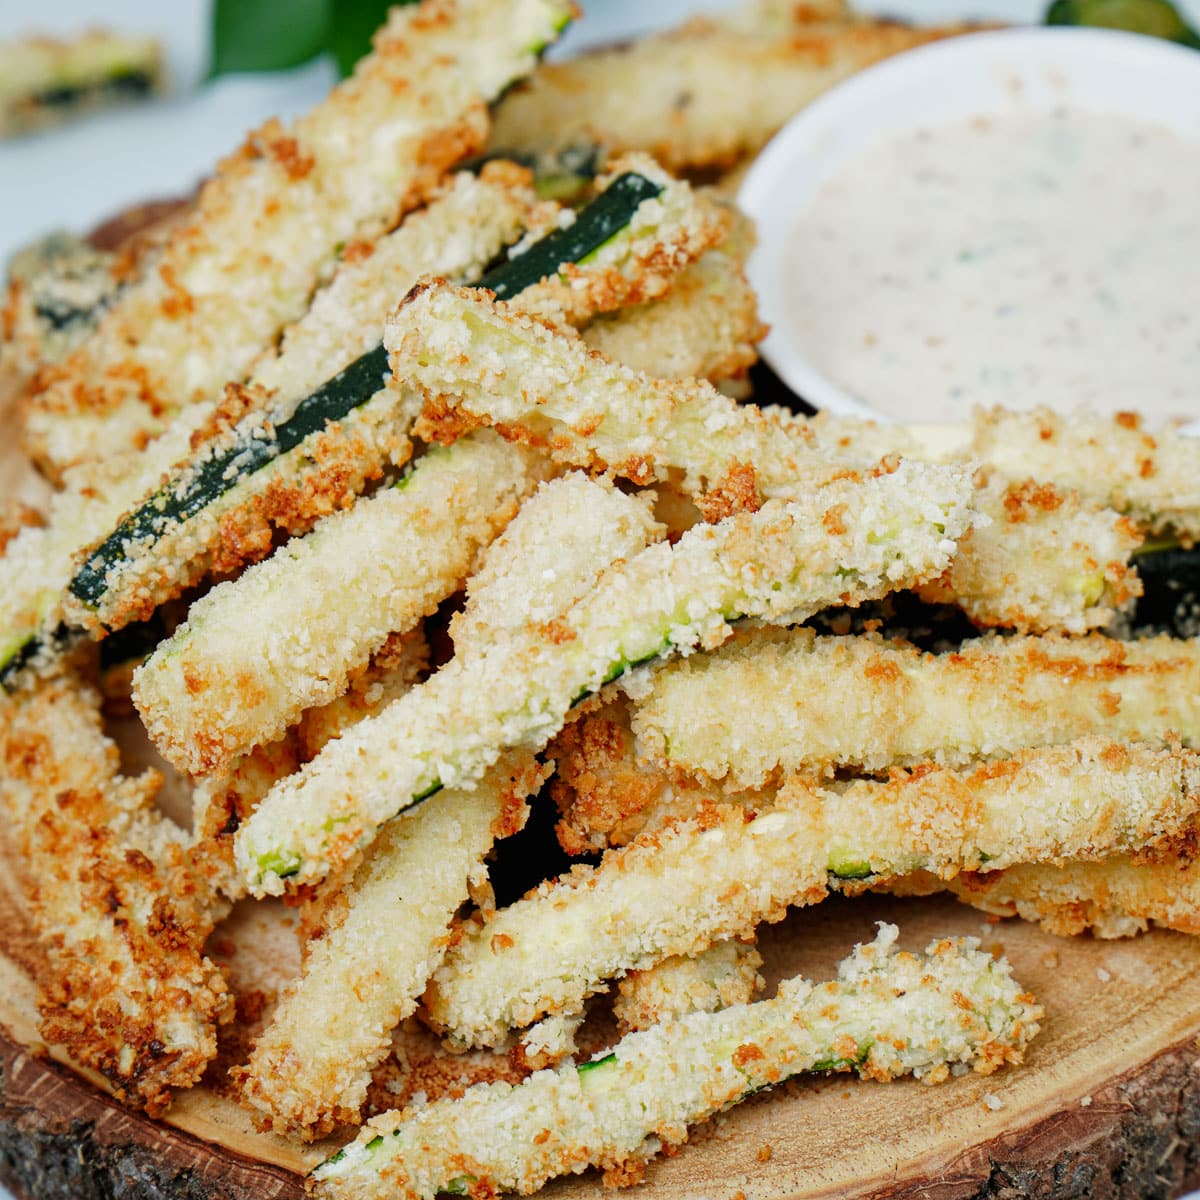 Air fried zucchini fries with ranch dipping sauce.